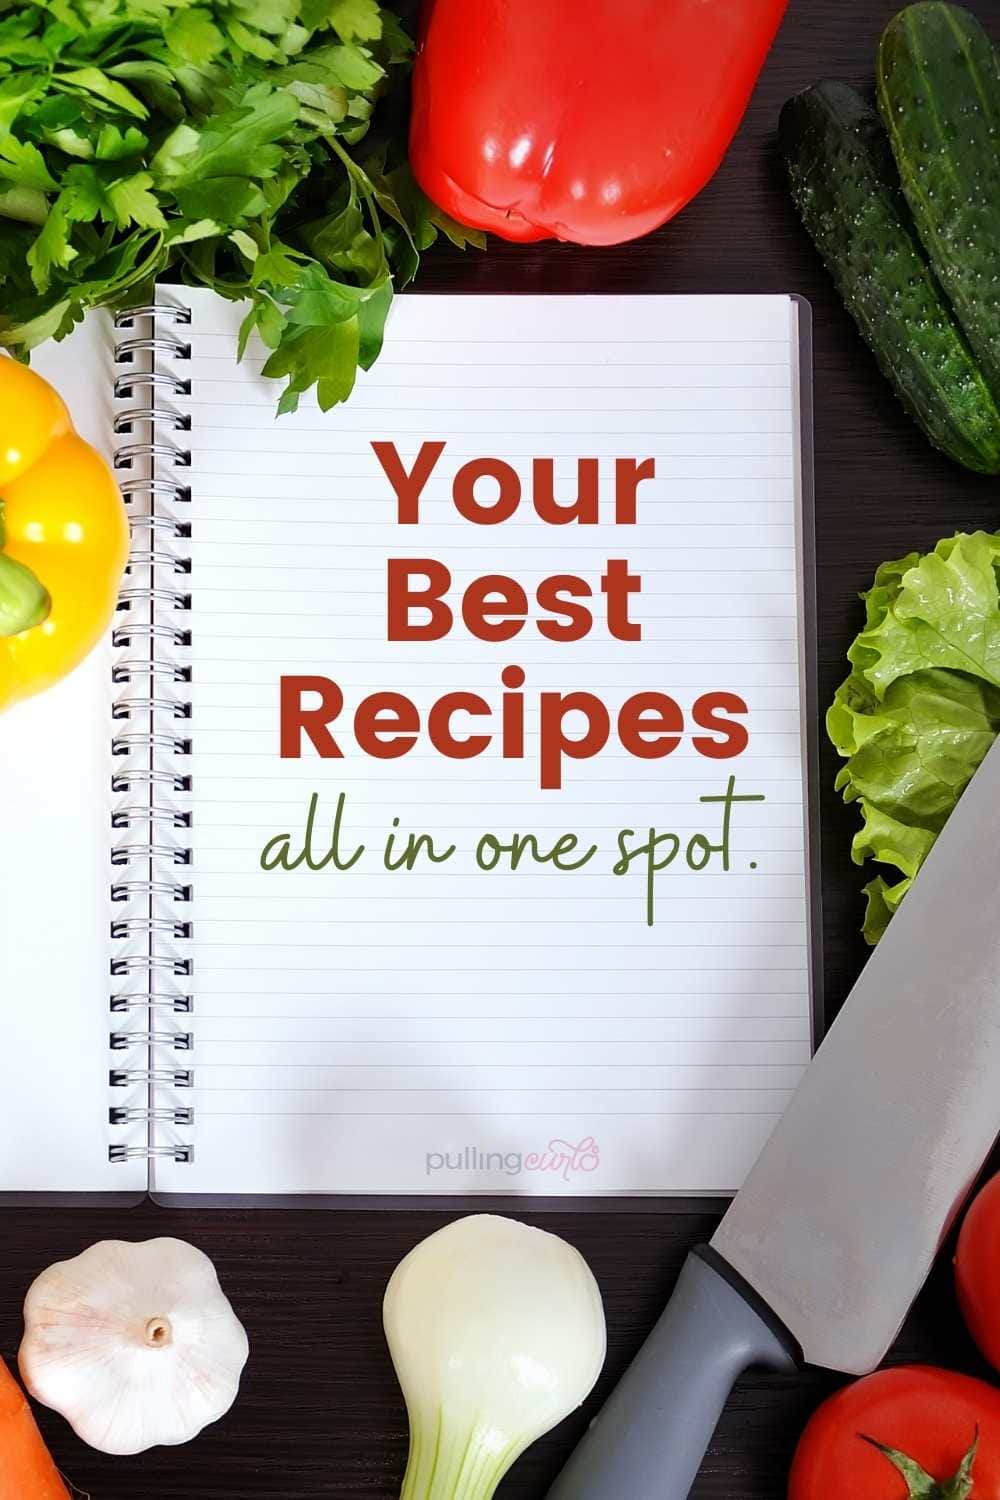 Organize your FAVORITE recipes into one spot for easy dinner! via @pullingcurls